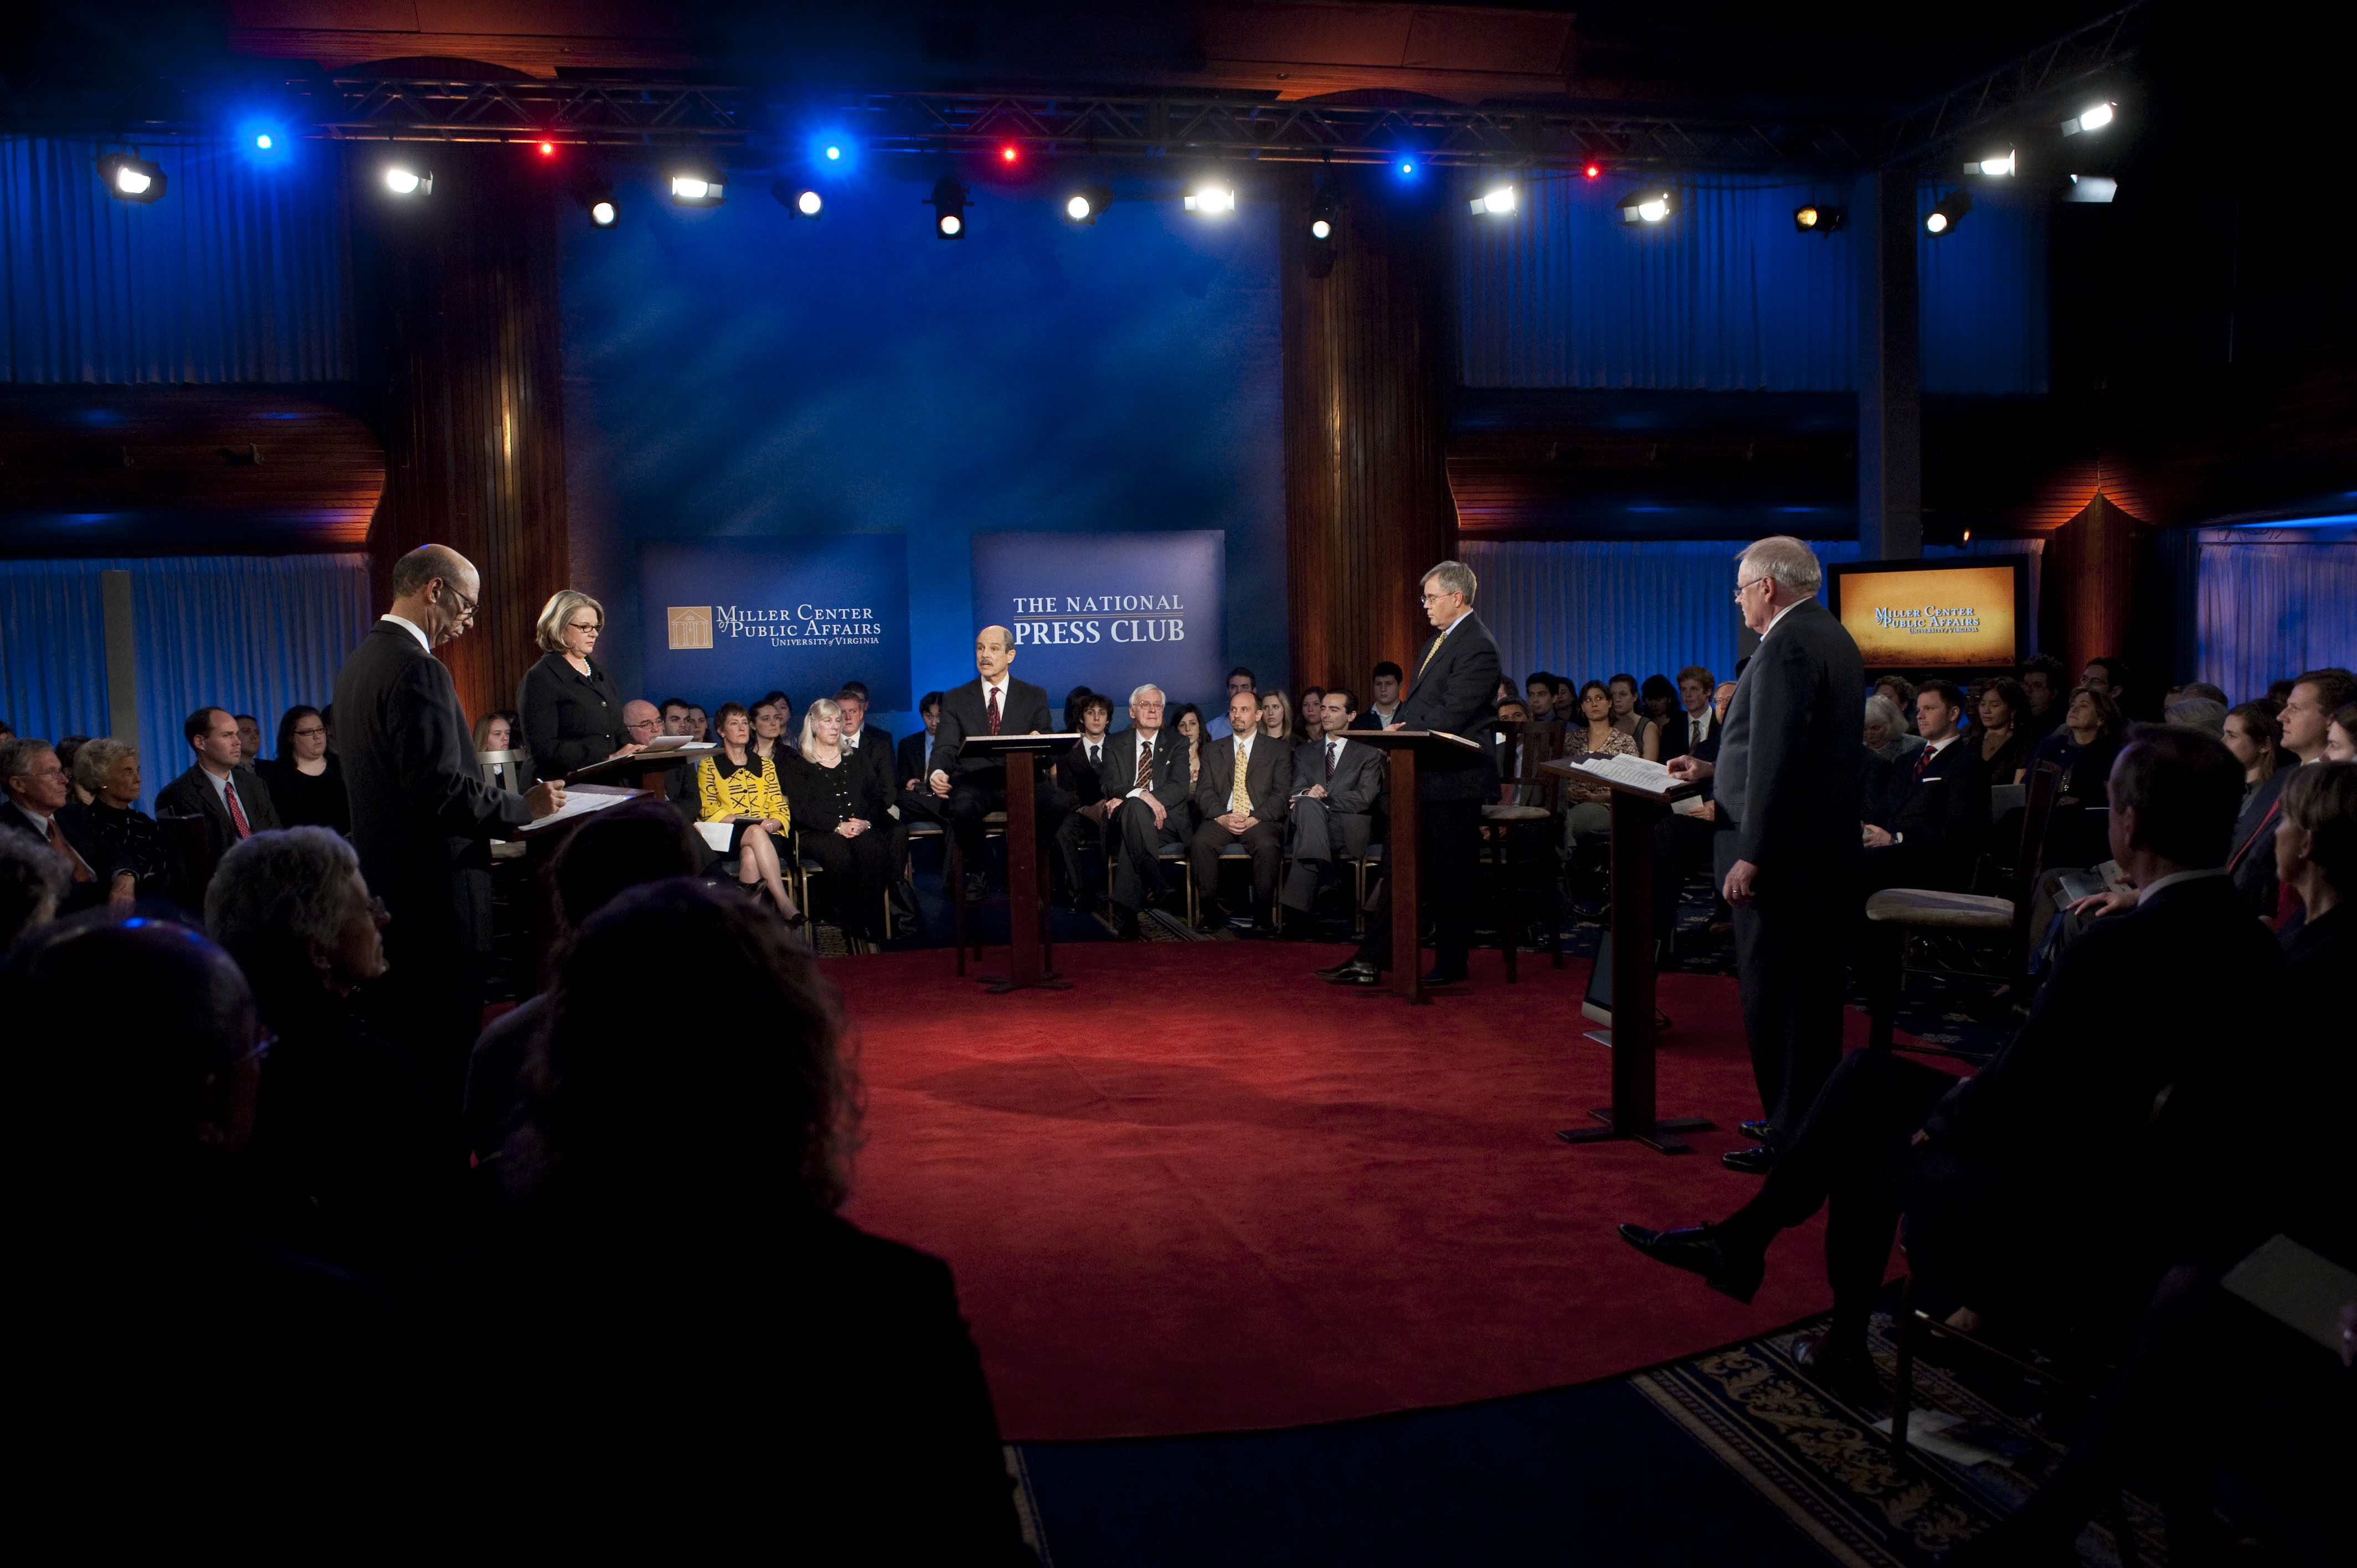 Michael Lomax, Margaret Spellings, Paul Solman, George Leef, and Richard Vedder stand at podiums in a circle during a debate